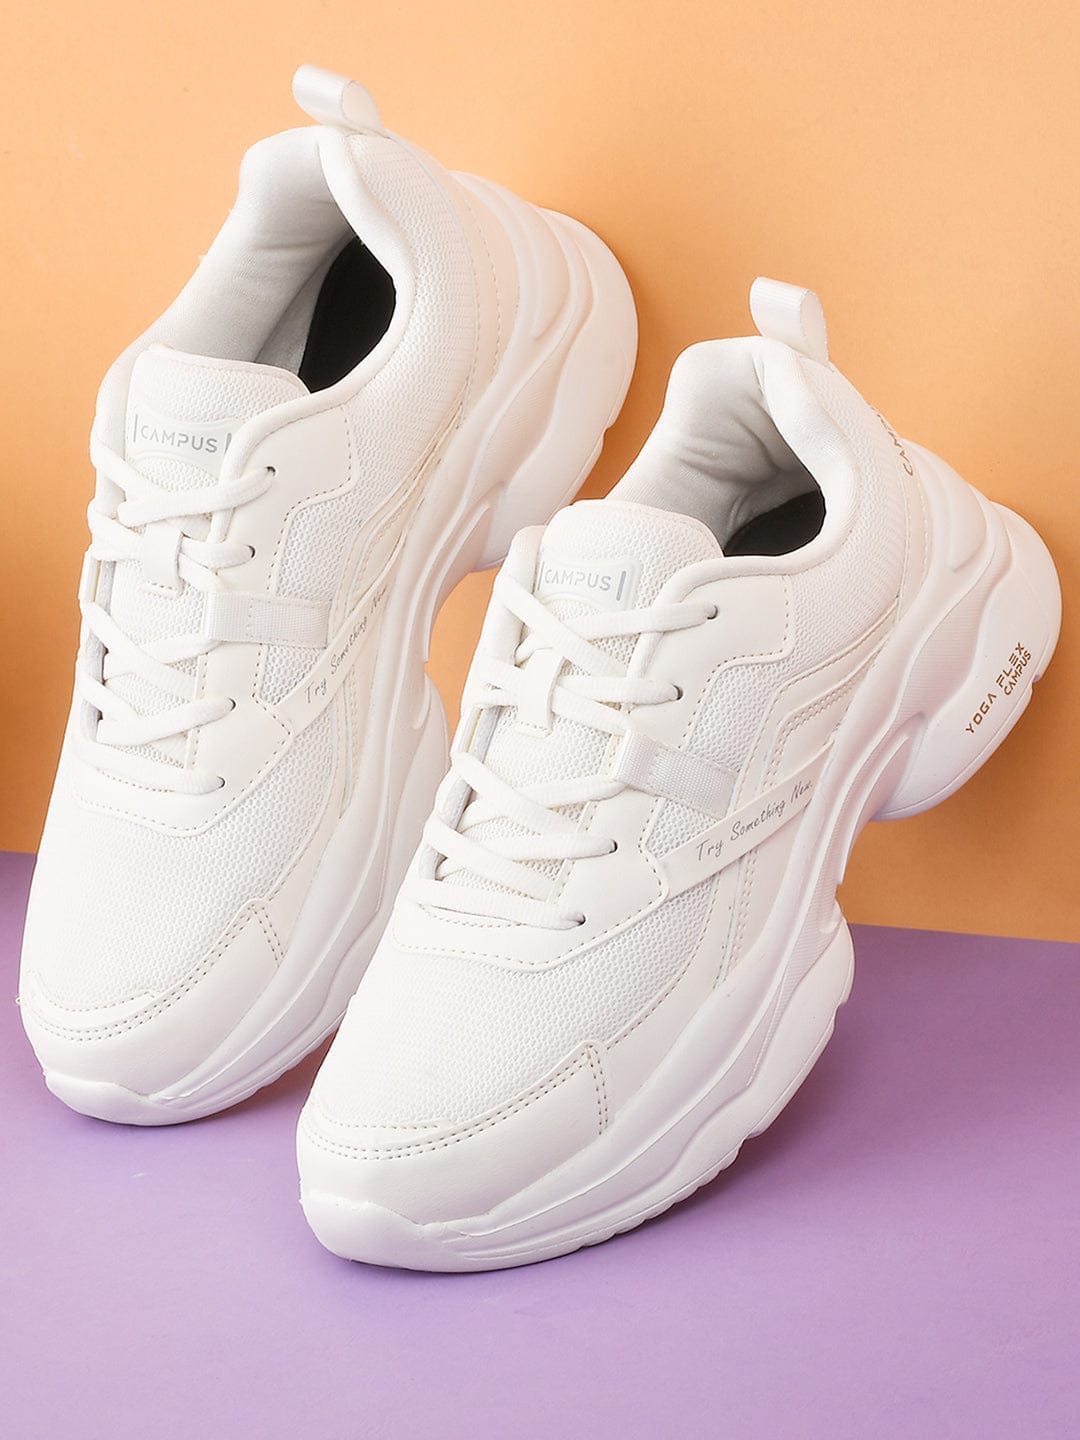 Share more than 185 sneakers white shoes women super hot